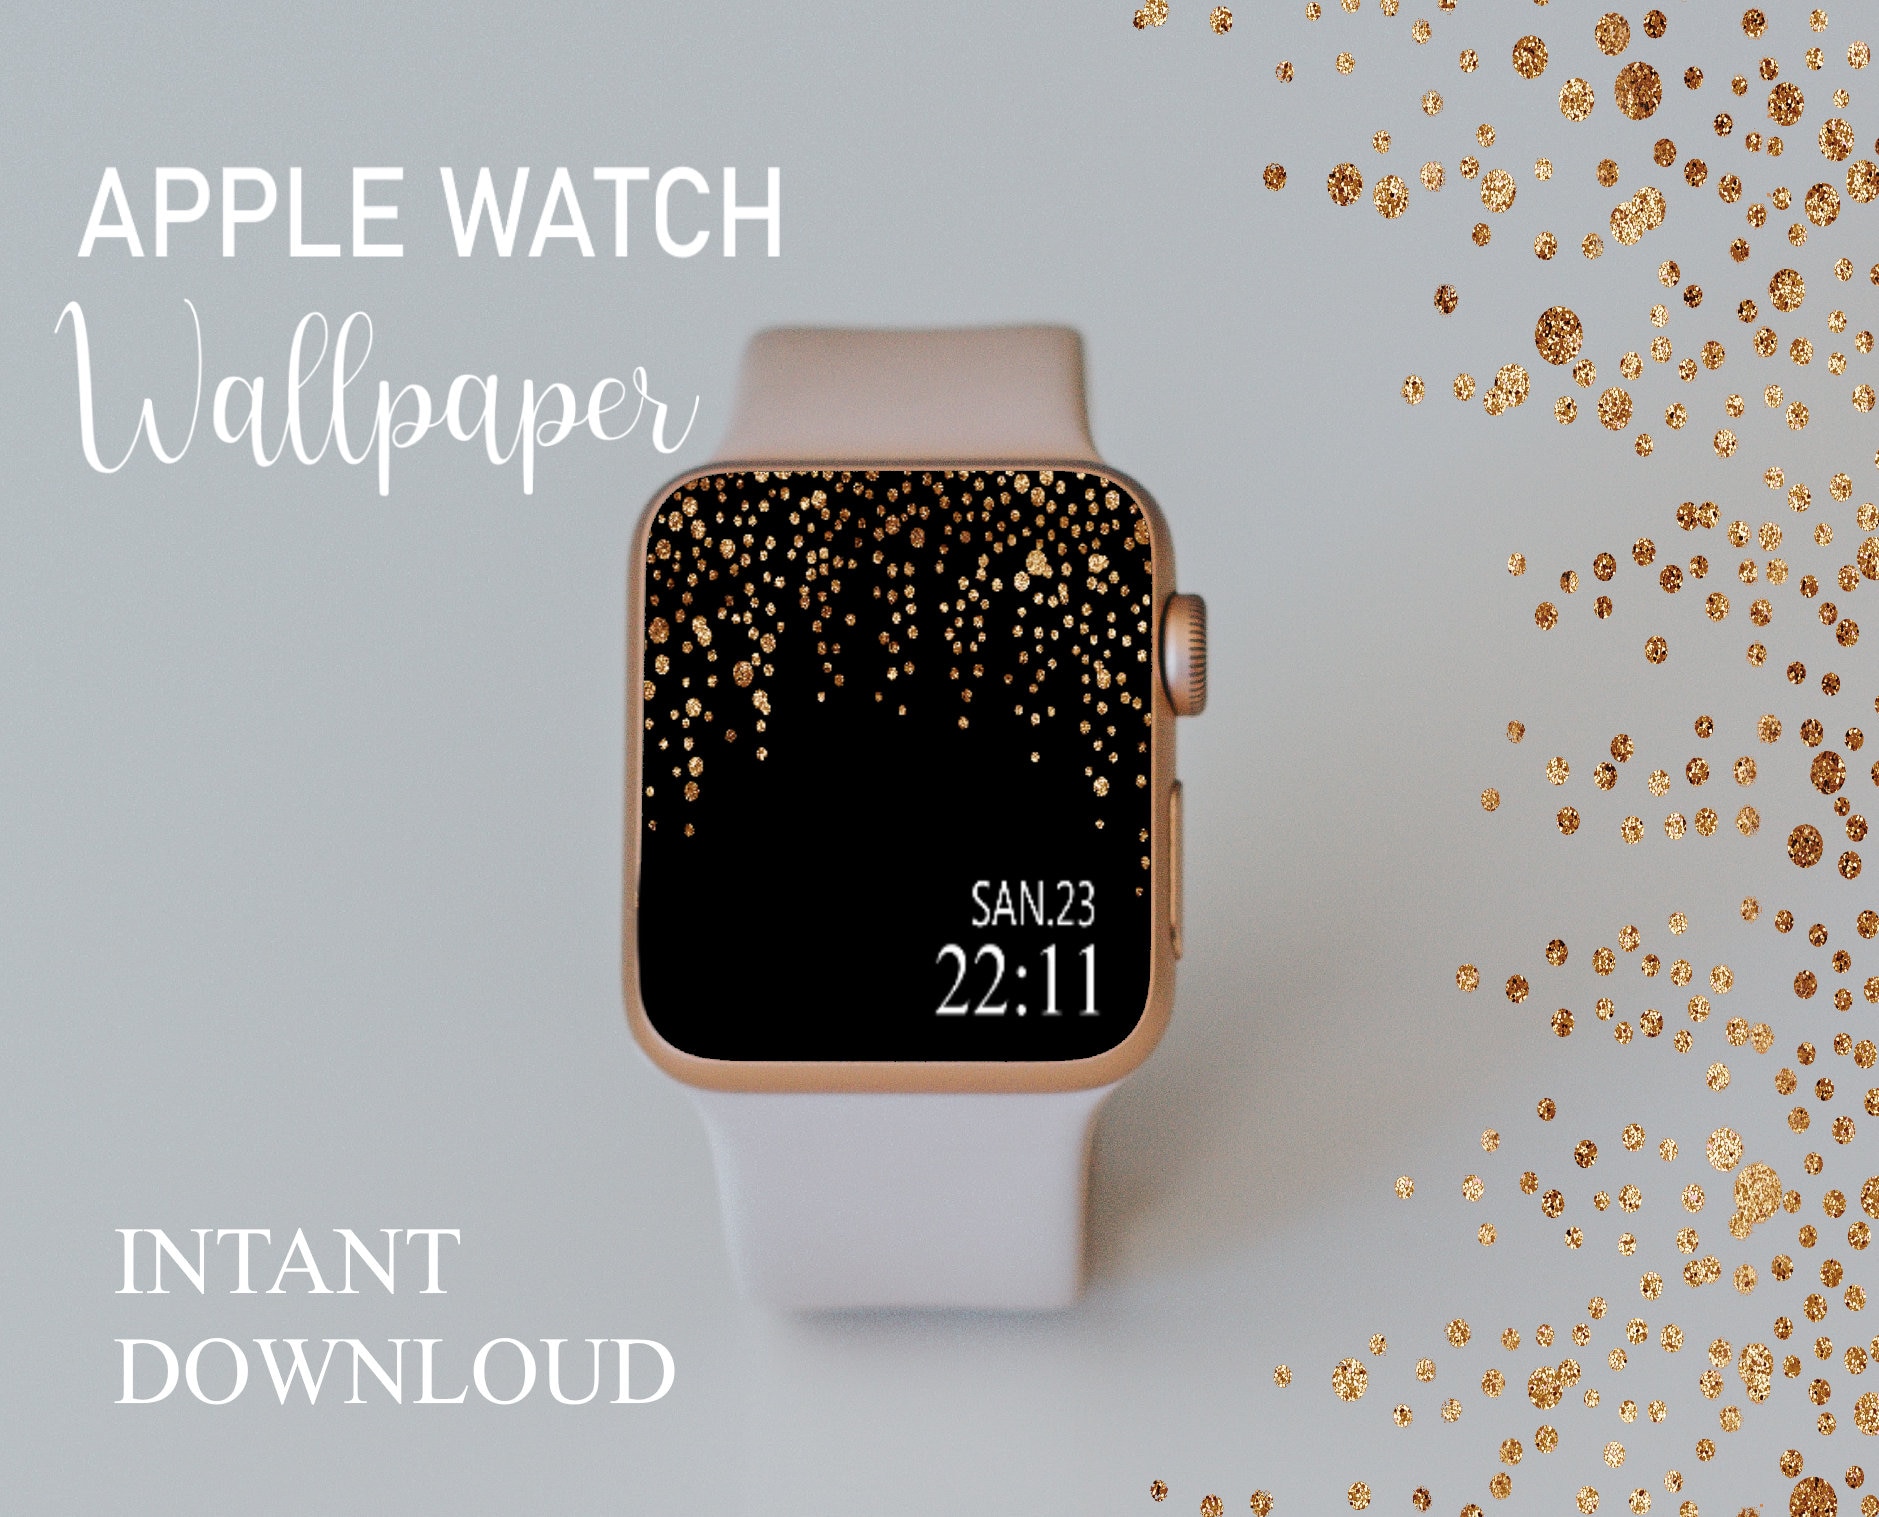 Blossom Pink Apple Watch Wallpaper Floral Flower Garden  Etsy  Apple  watch wallpaper Apple watch Pink apple